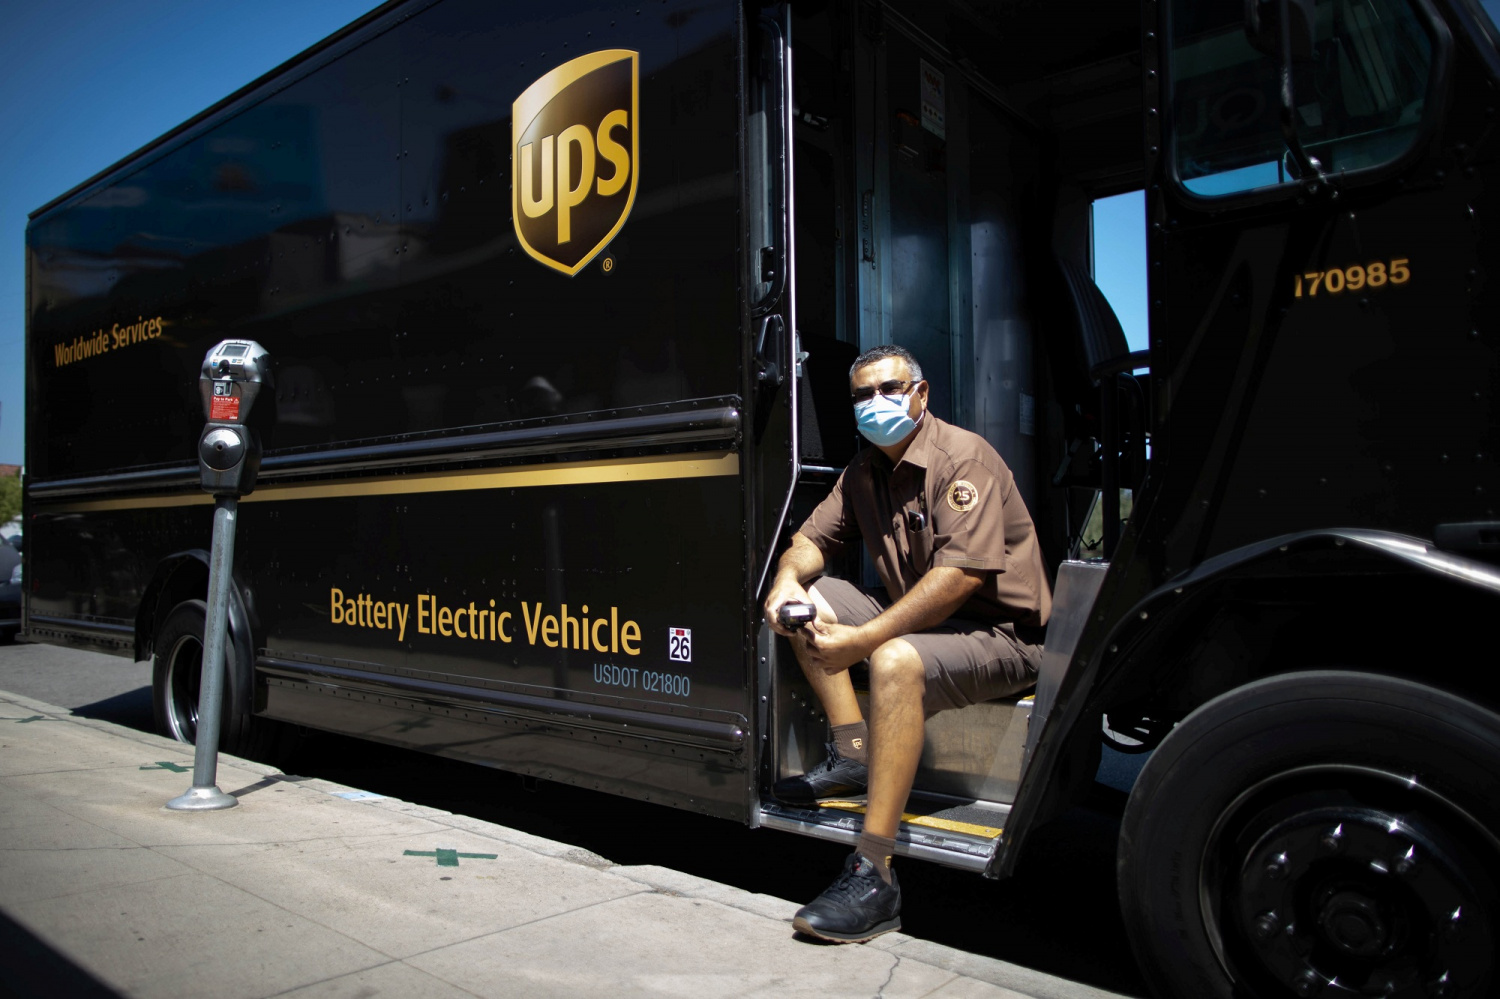 UPS To Offer Buyout Packages To Management Employees As Part Of